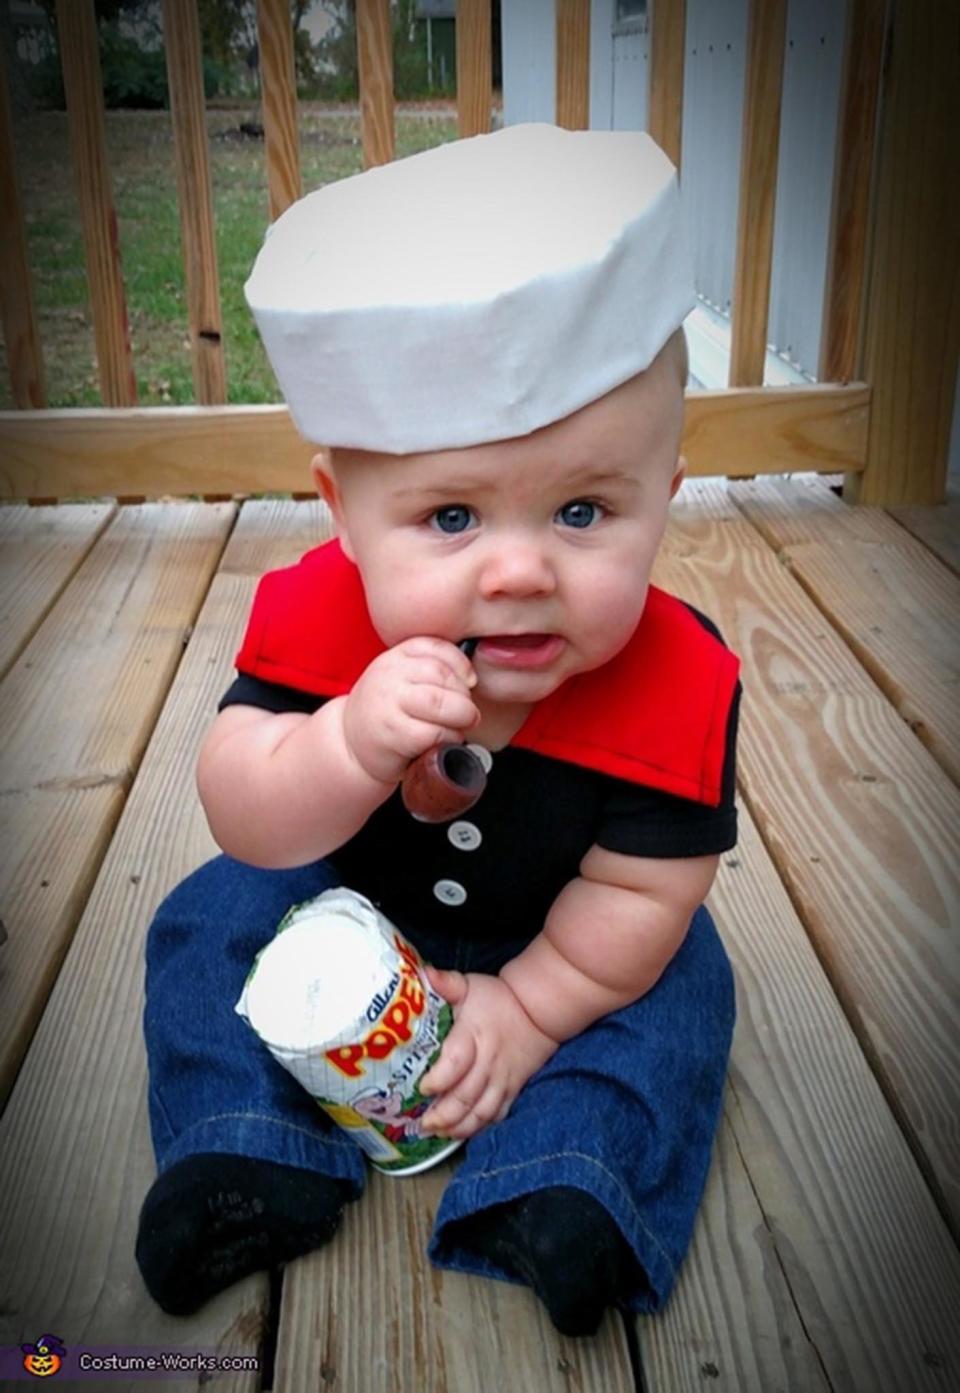 Via <a href="http://www.costume-works.com/costumes_for_babies/popeye-baby.html" target="_blank">Costume Works</a>